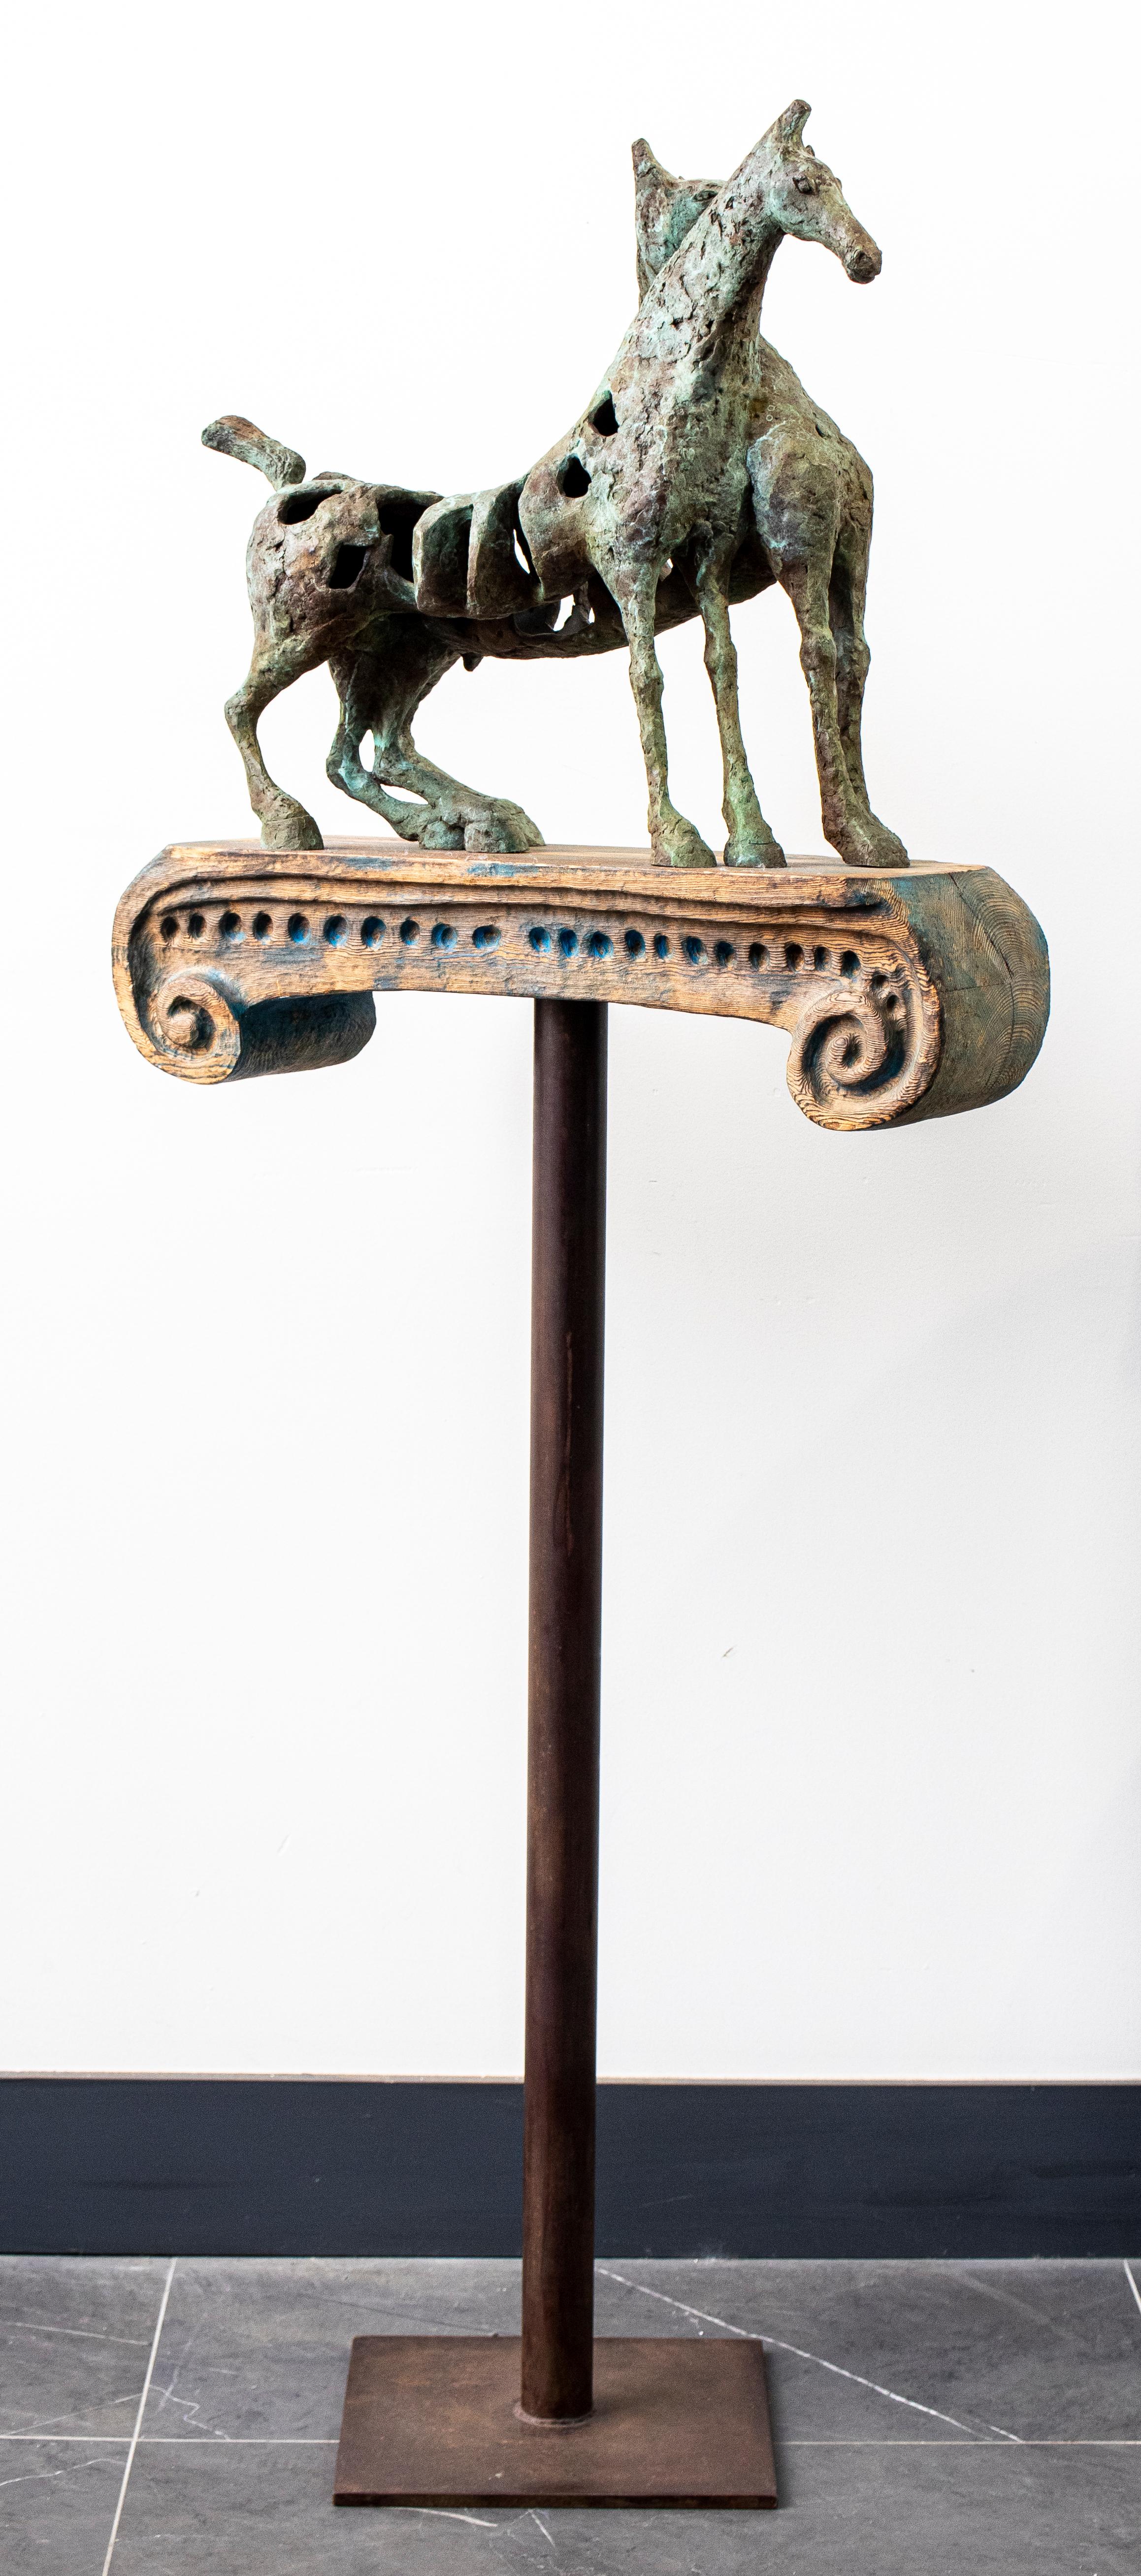 Maria Luisa Campoy (Spanish b.1945) Modernist bronze sculpture of two inter bodied horses atop a stylized carved wood ionic chapter, mounted on a metal stand, signed 'L. Campoy 3/8'. 62.5